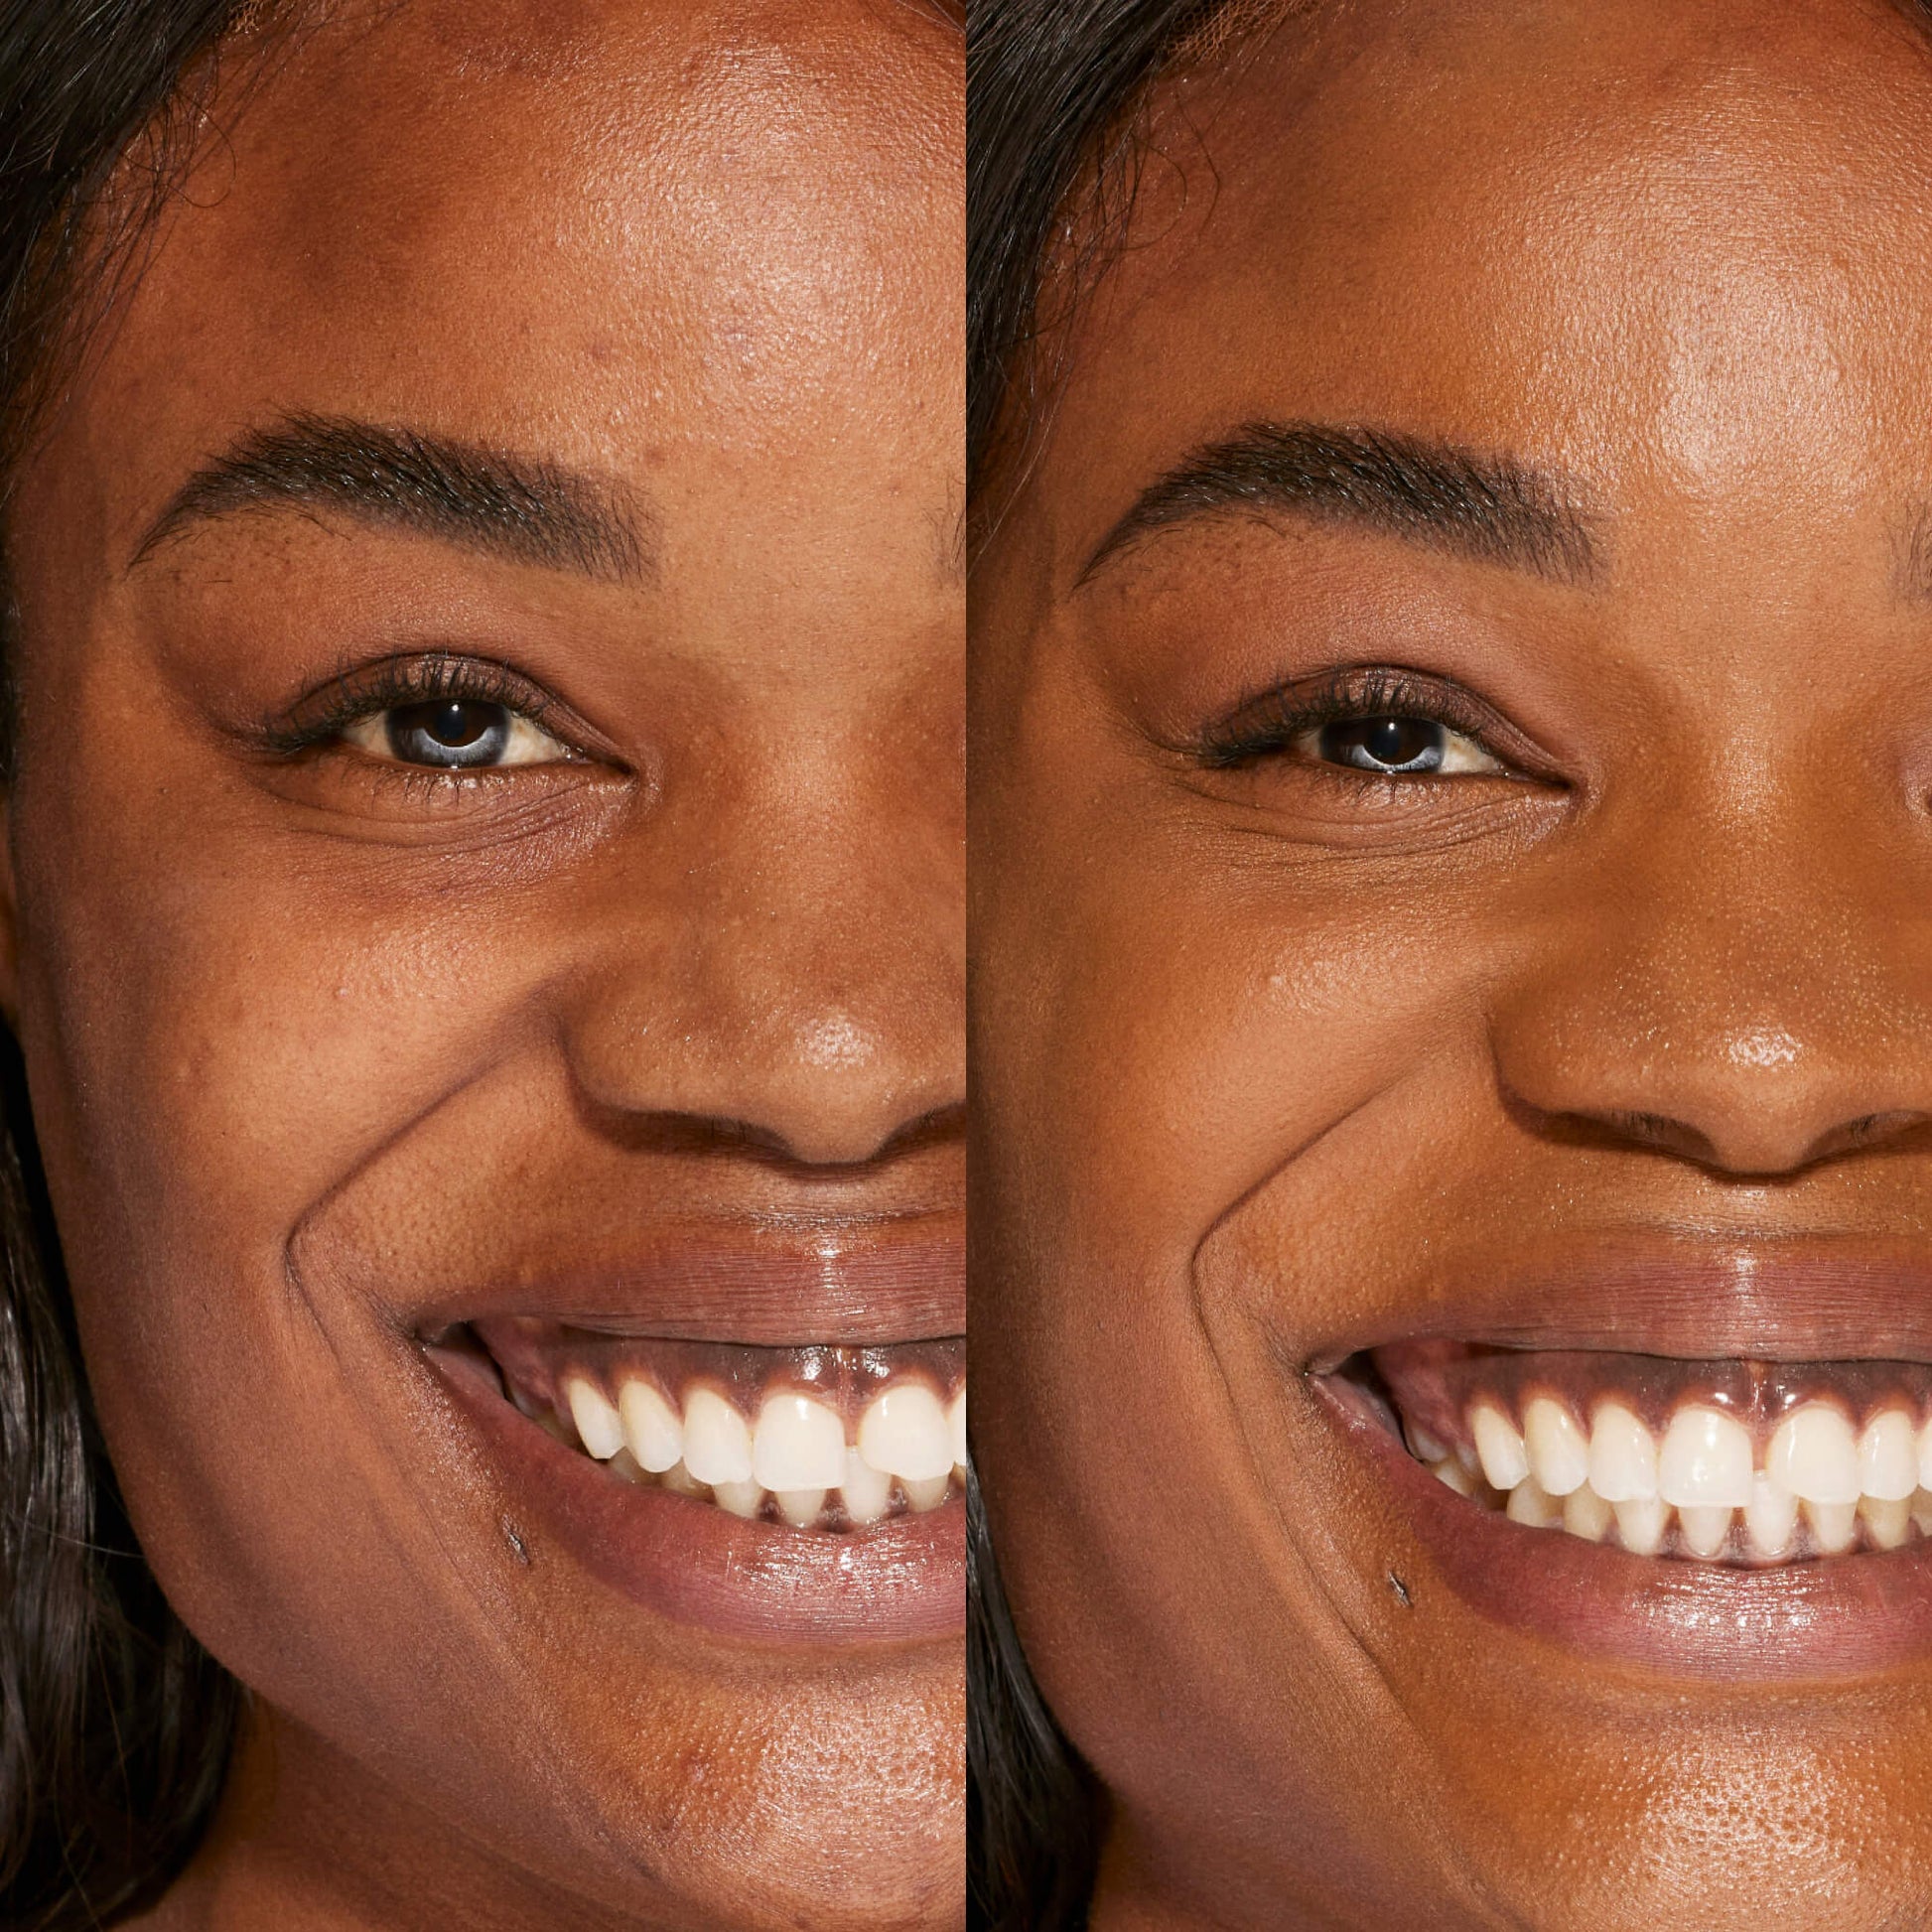 A person's face before and after using Tower 28 Beauty's Swipe Serum Concealer in shade 18.0 SGV to cover up dark circles, blemishes, and discoloration